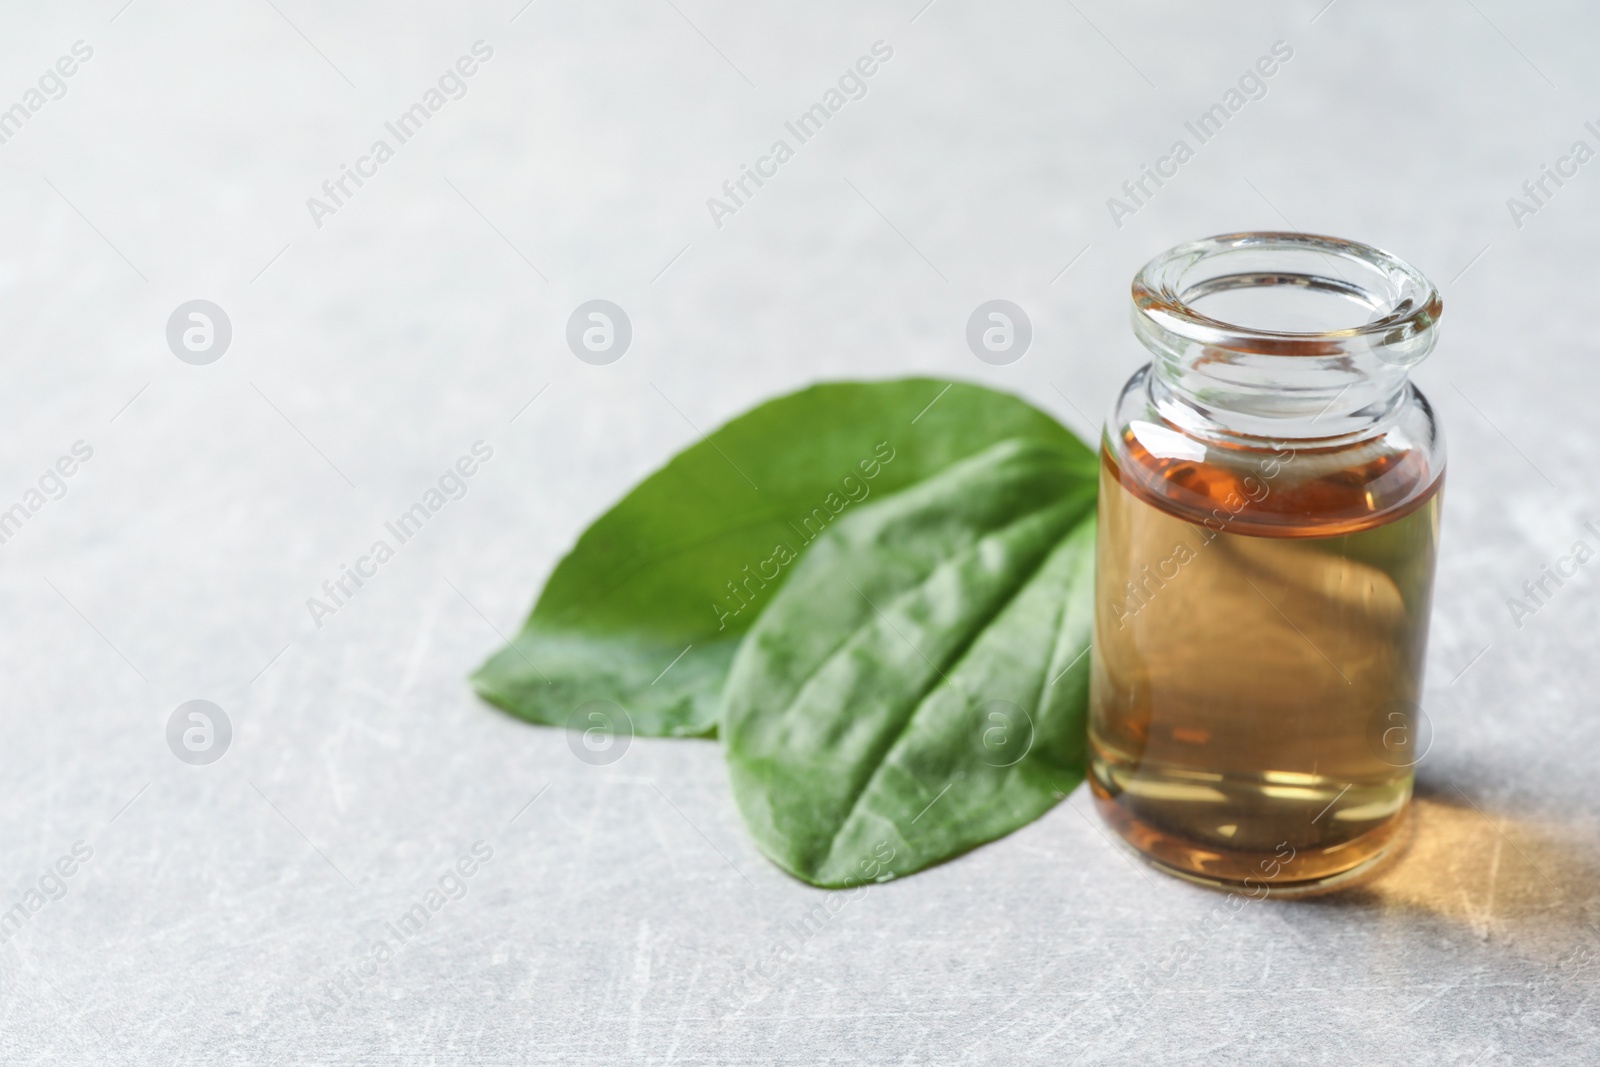 Photo of Bottle of broadleaf plantain extract and leaves on light table. Space for text